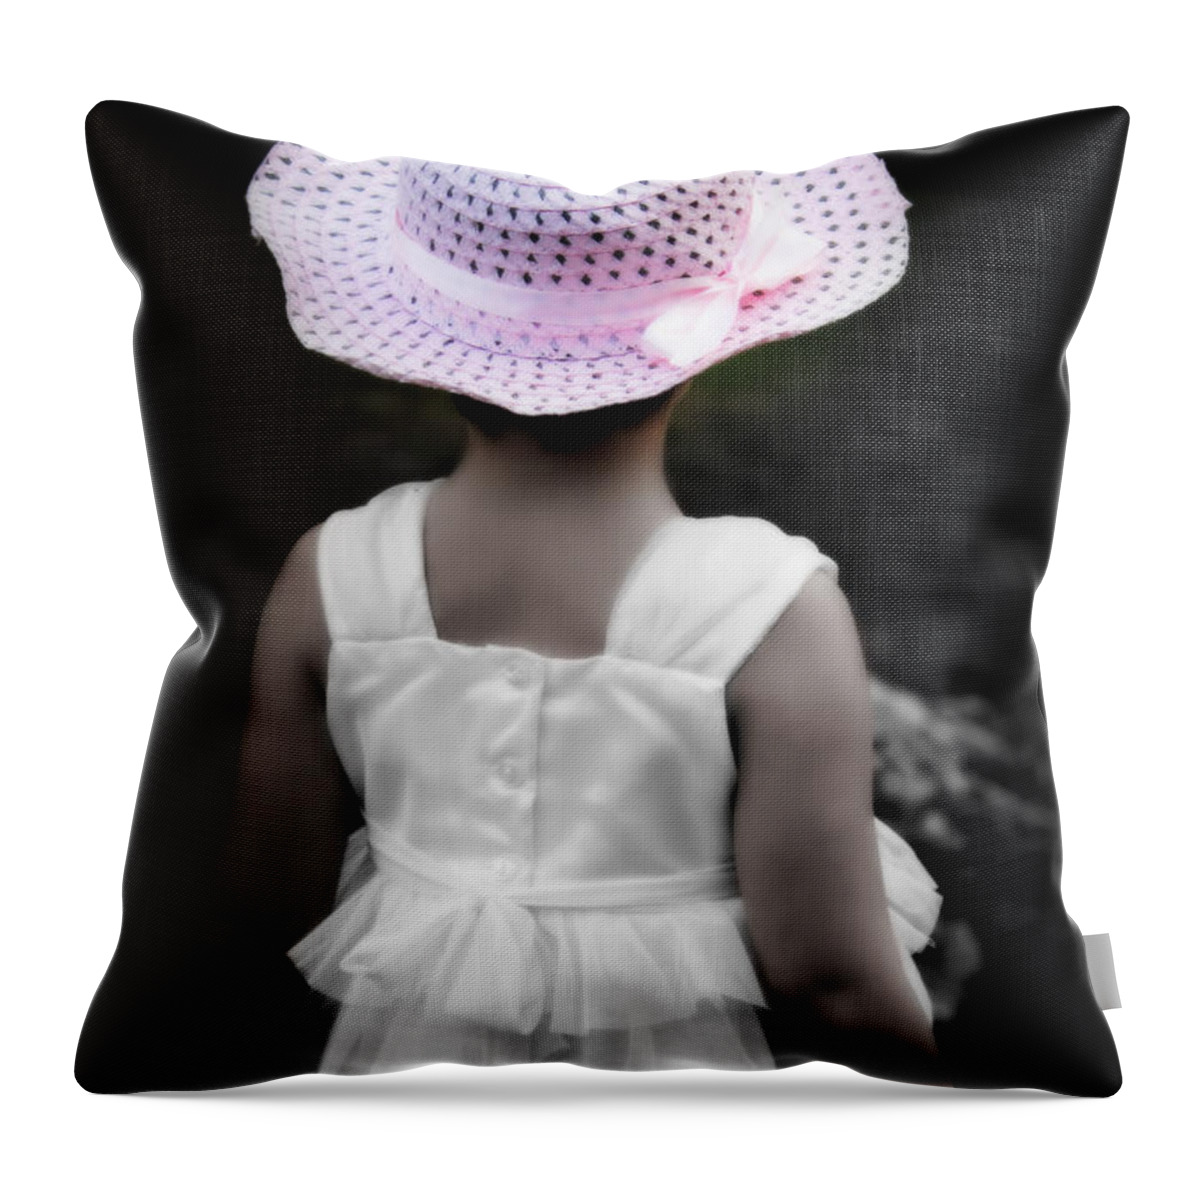 Easter Angel Throw Pillow featuring the photograph Easter Angel by Jeanette C Landstrom